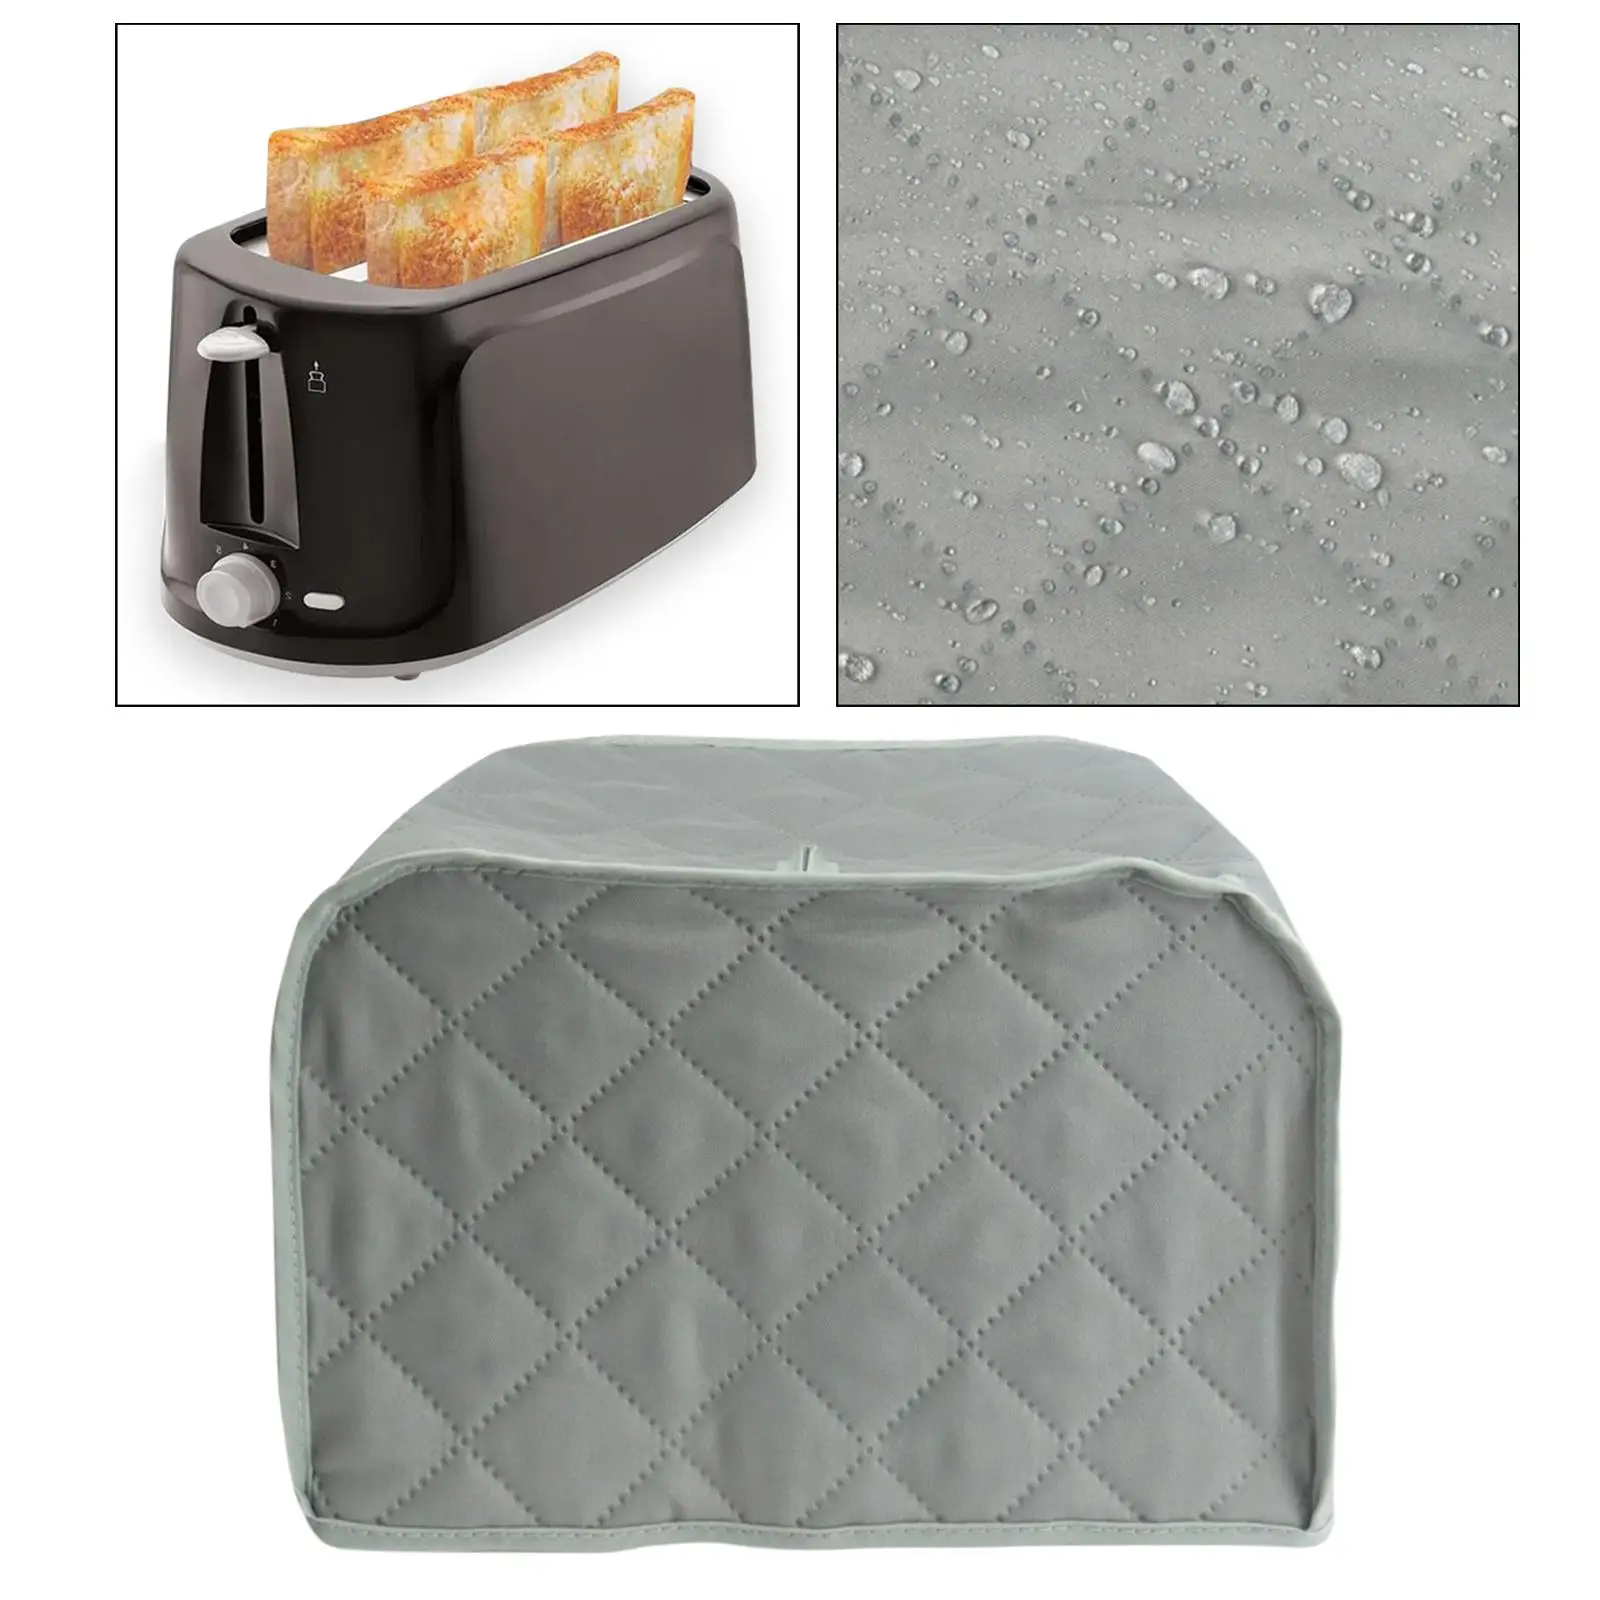 Washable Bread Machine Dust Cover Dust and Fingerprint Protection Kitchen Small Appliance Dust Cover